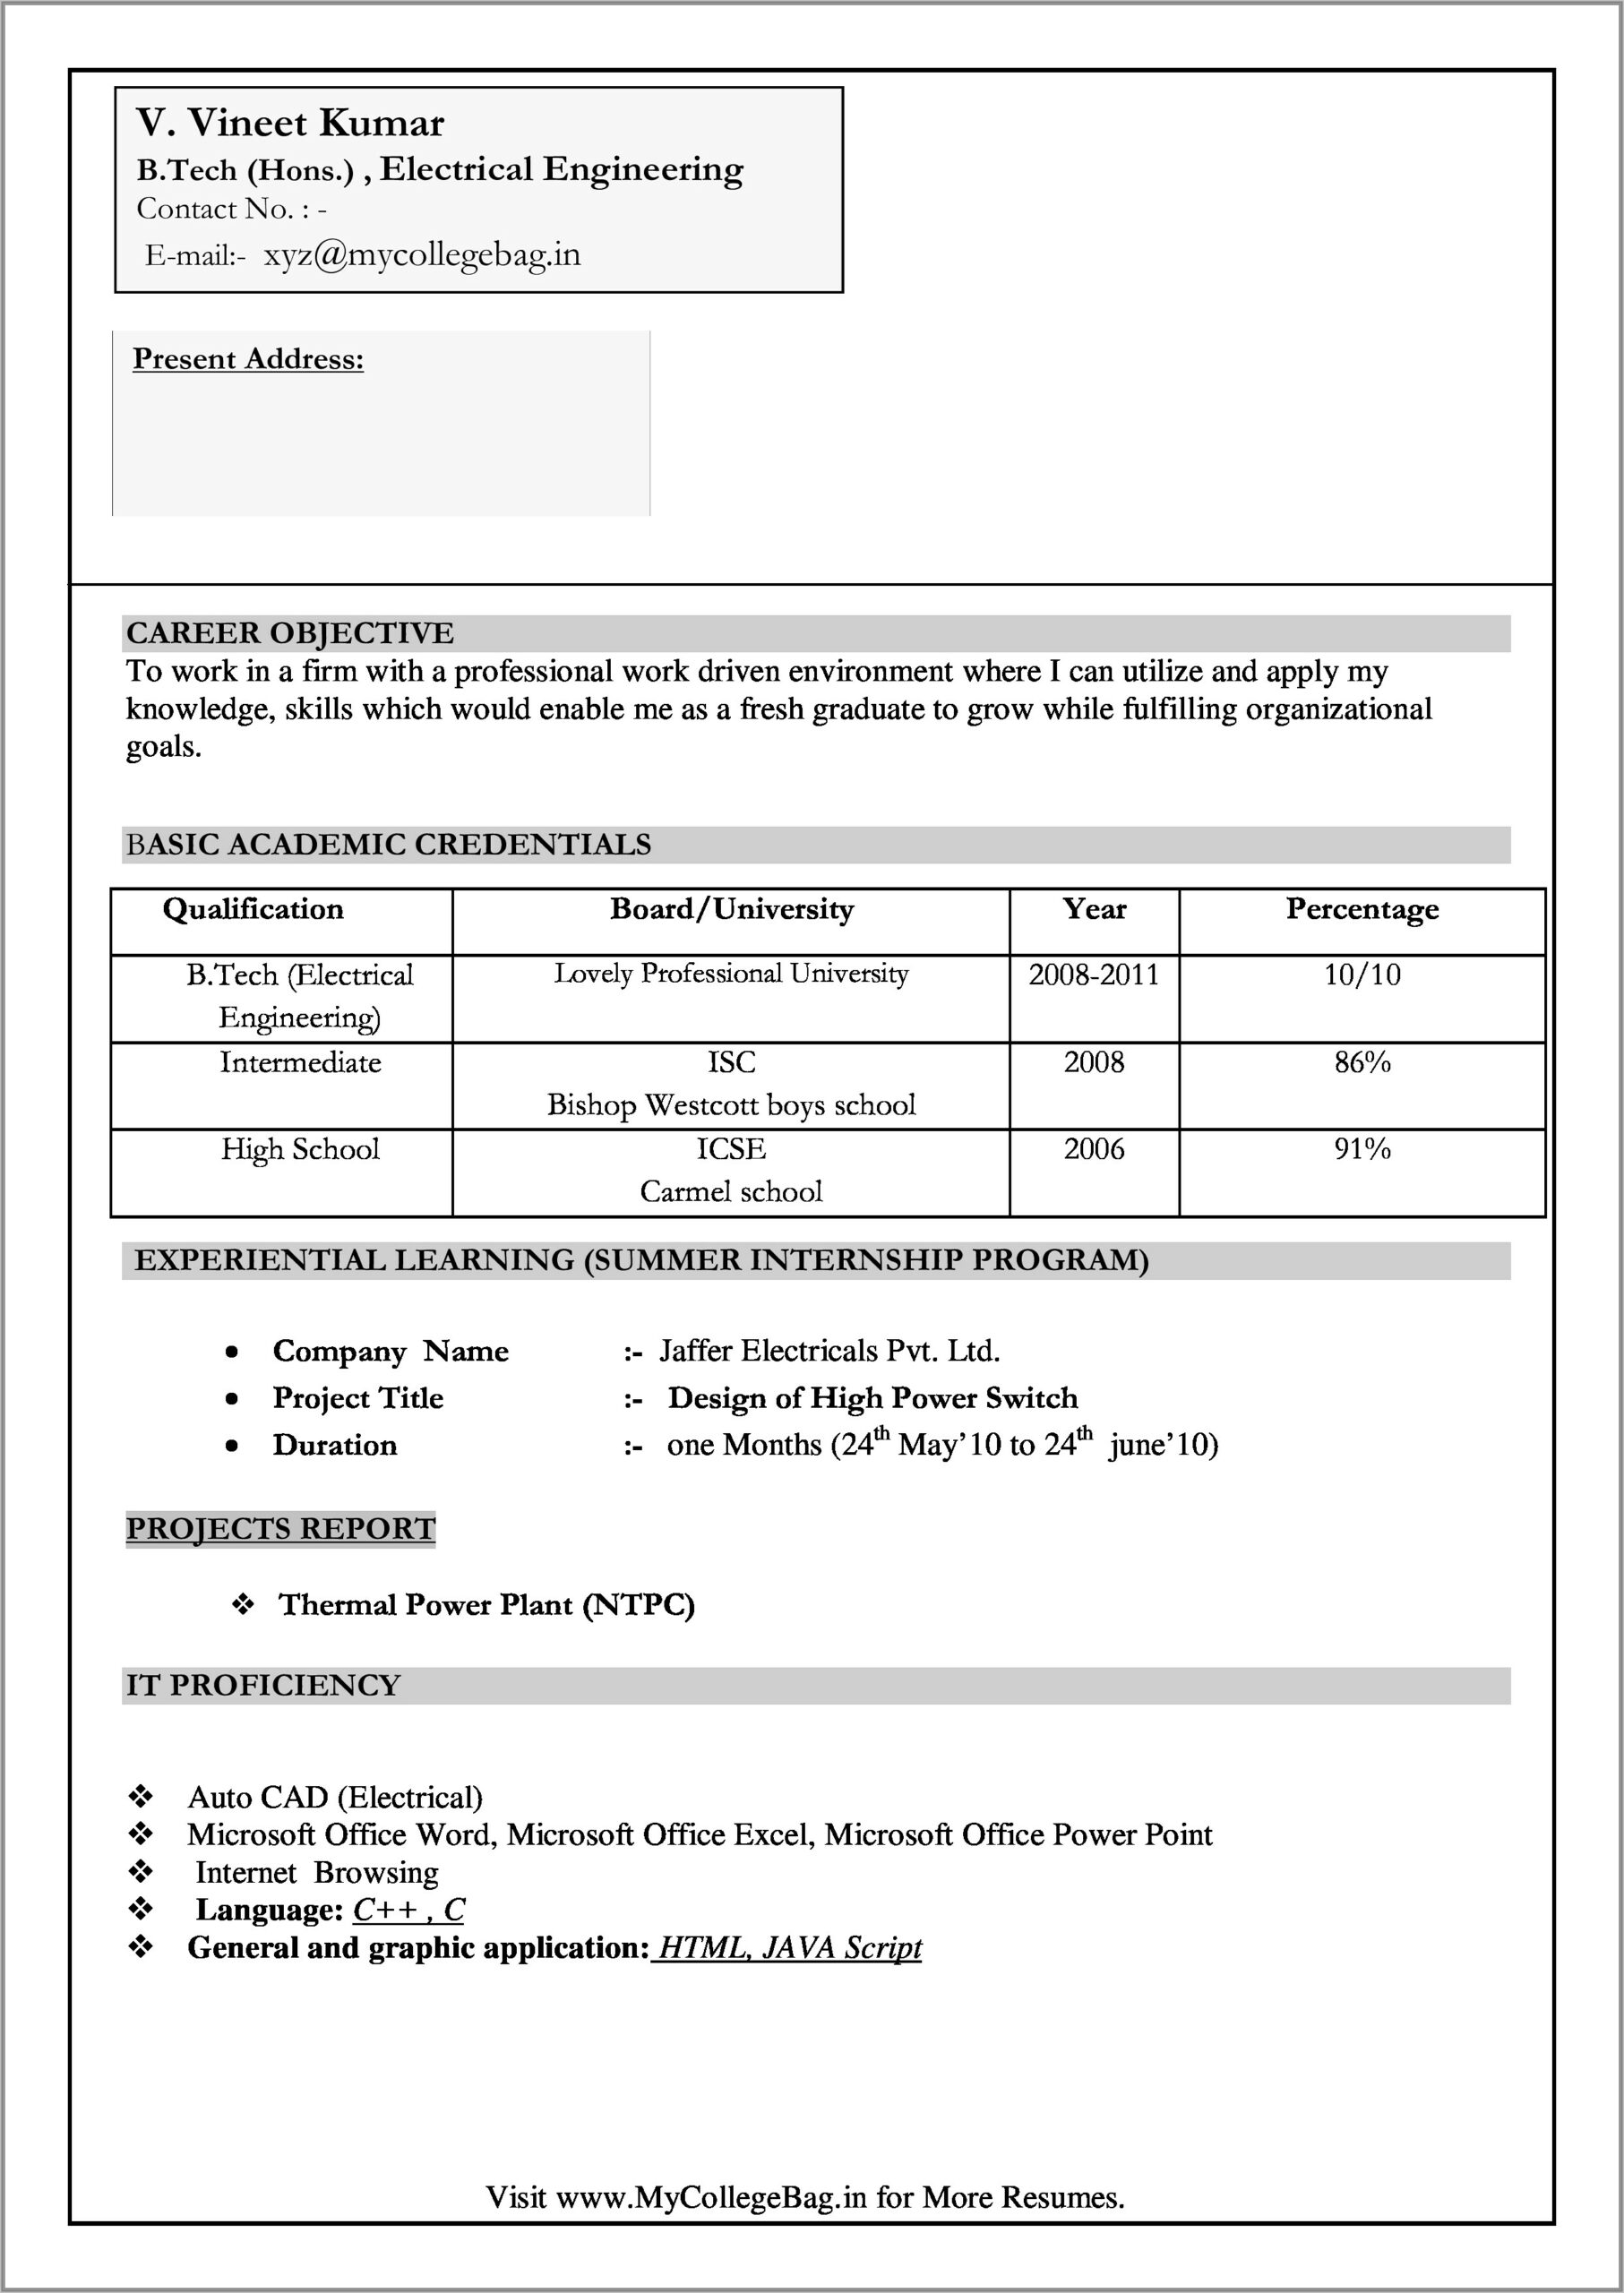 Cv Samples For Electrical Engineer Freshers